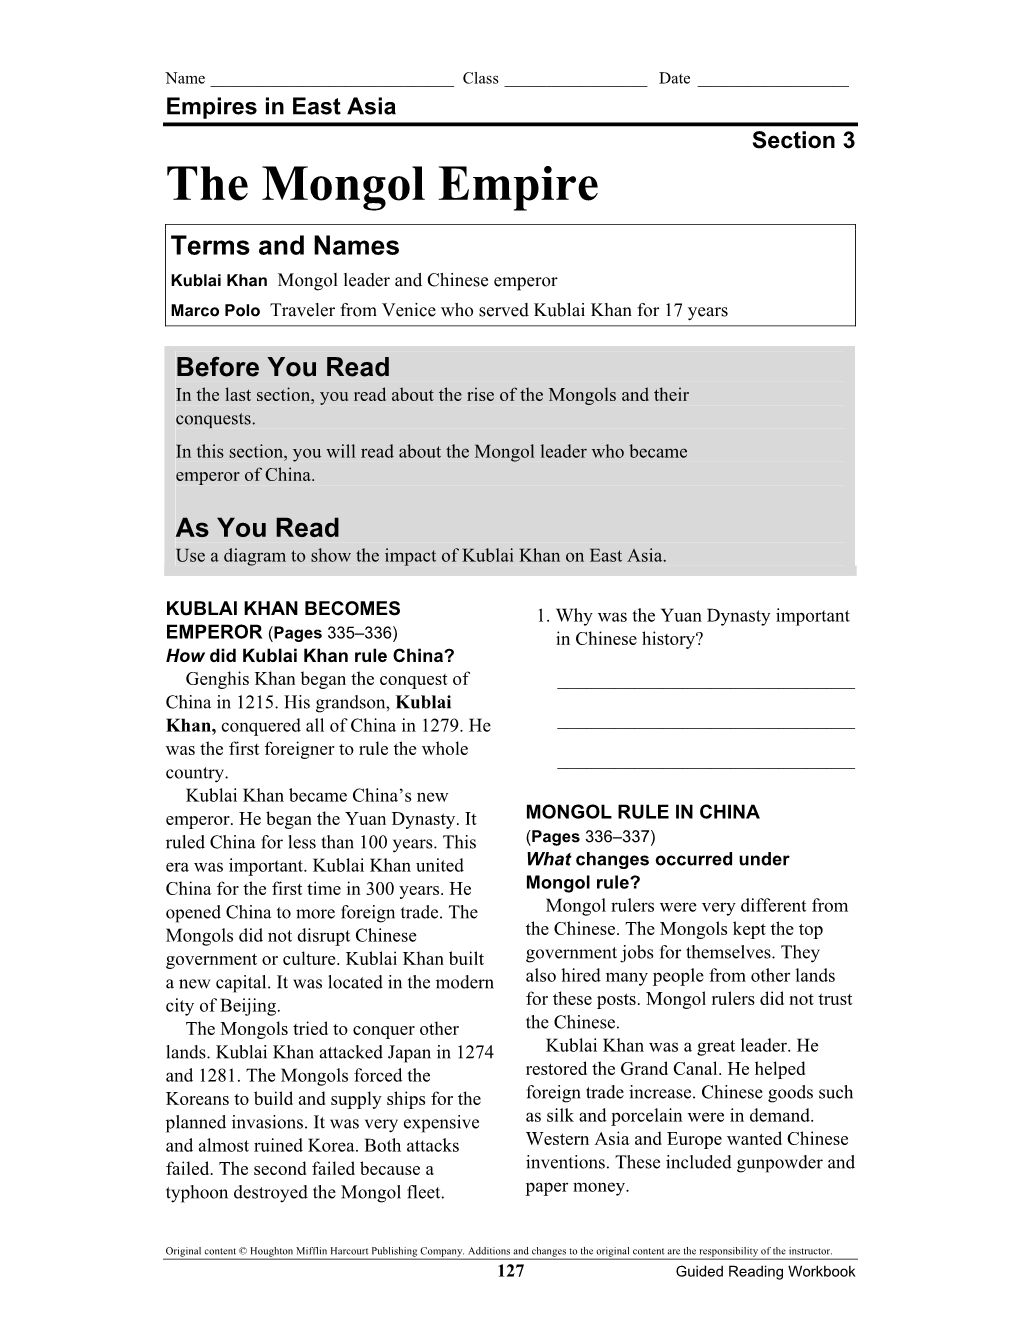 The Mongol Empire Terms and Names Kublai Khan Mongol Leader and Chinese Emperor Marco Polo Traveler from Venice Who Served Kublai Khan for 17 Years